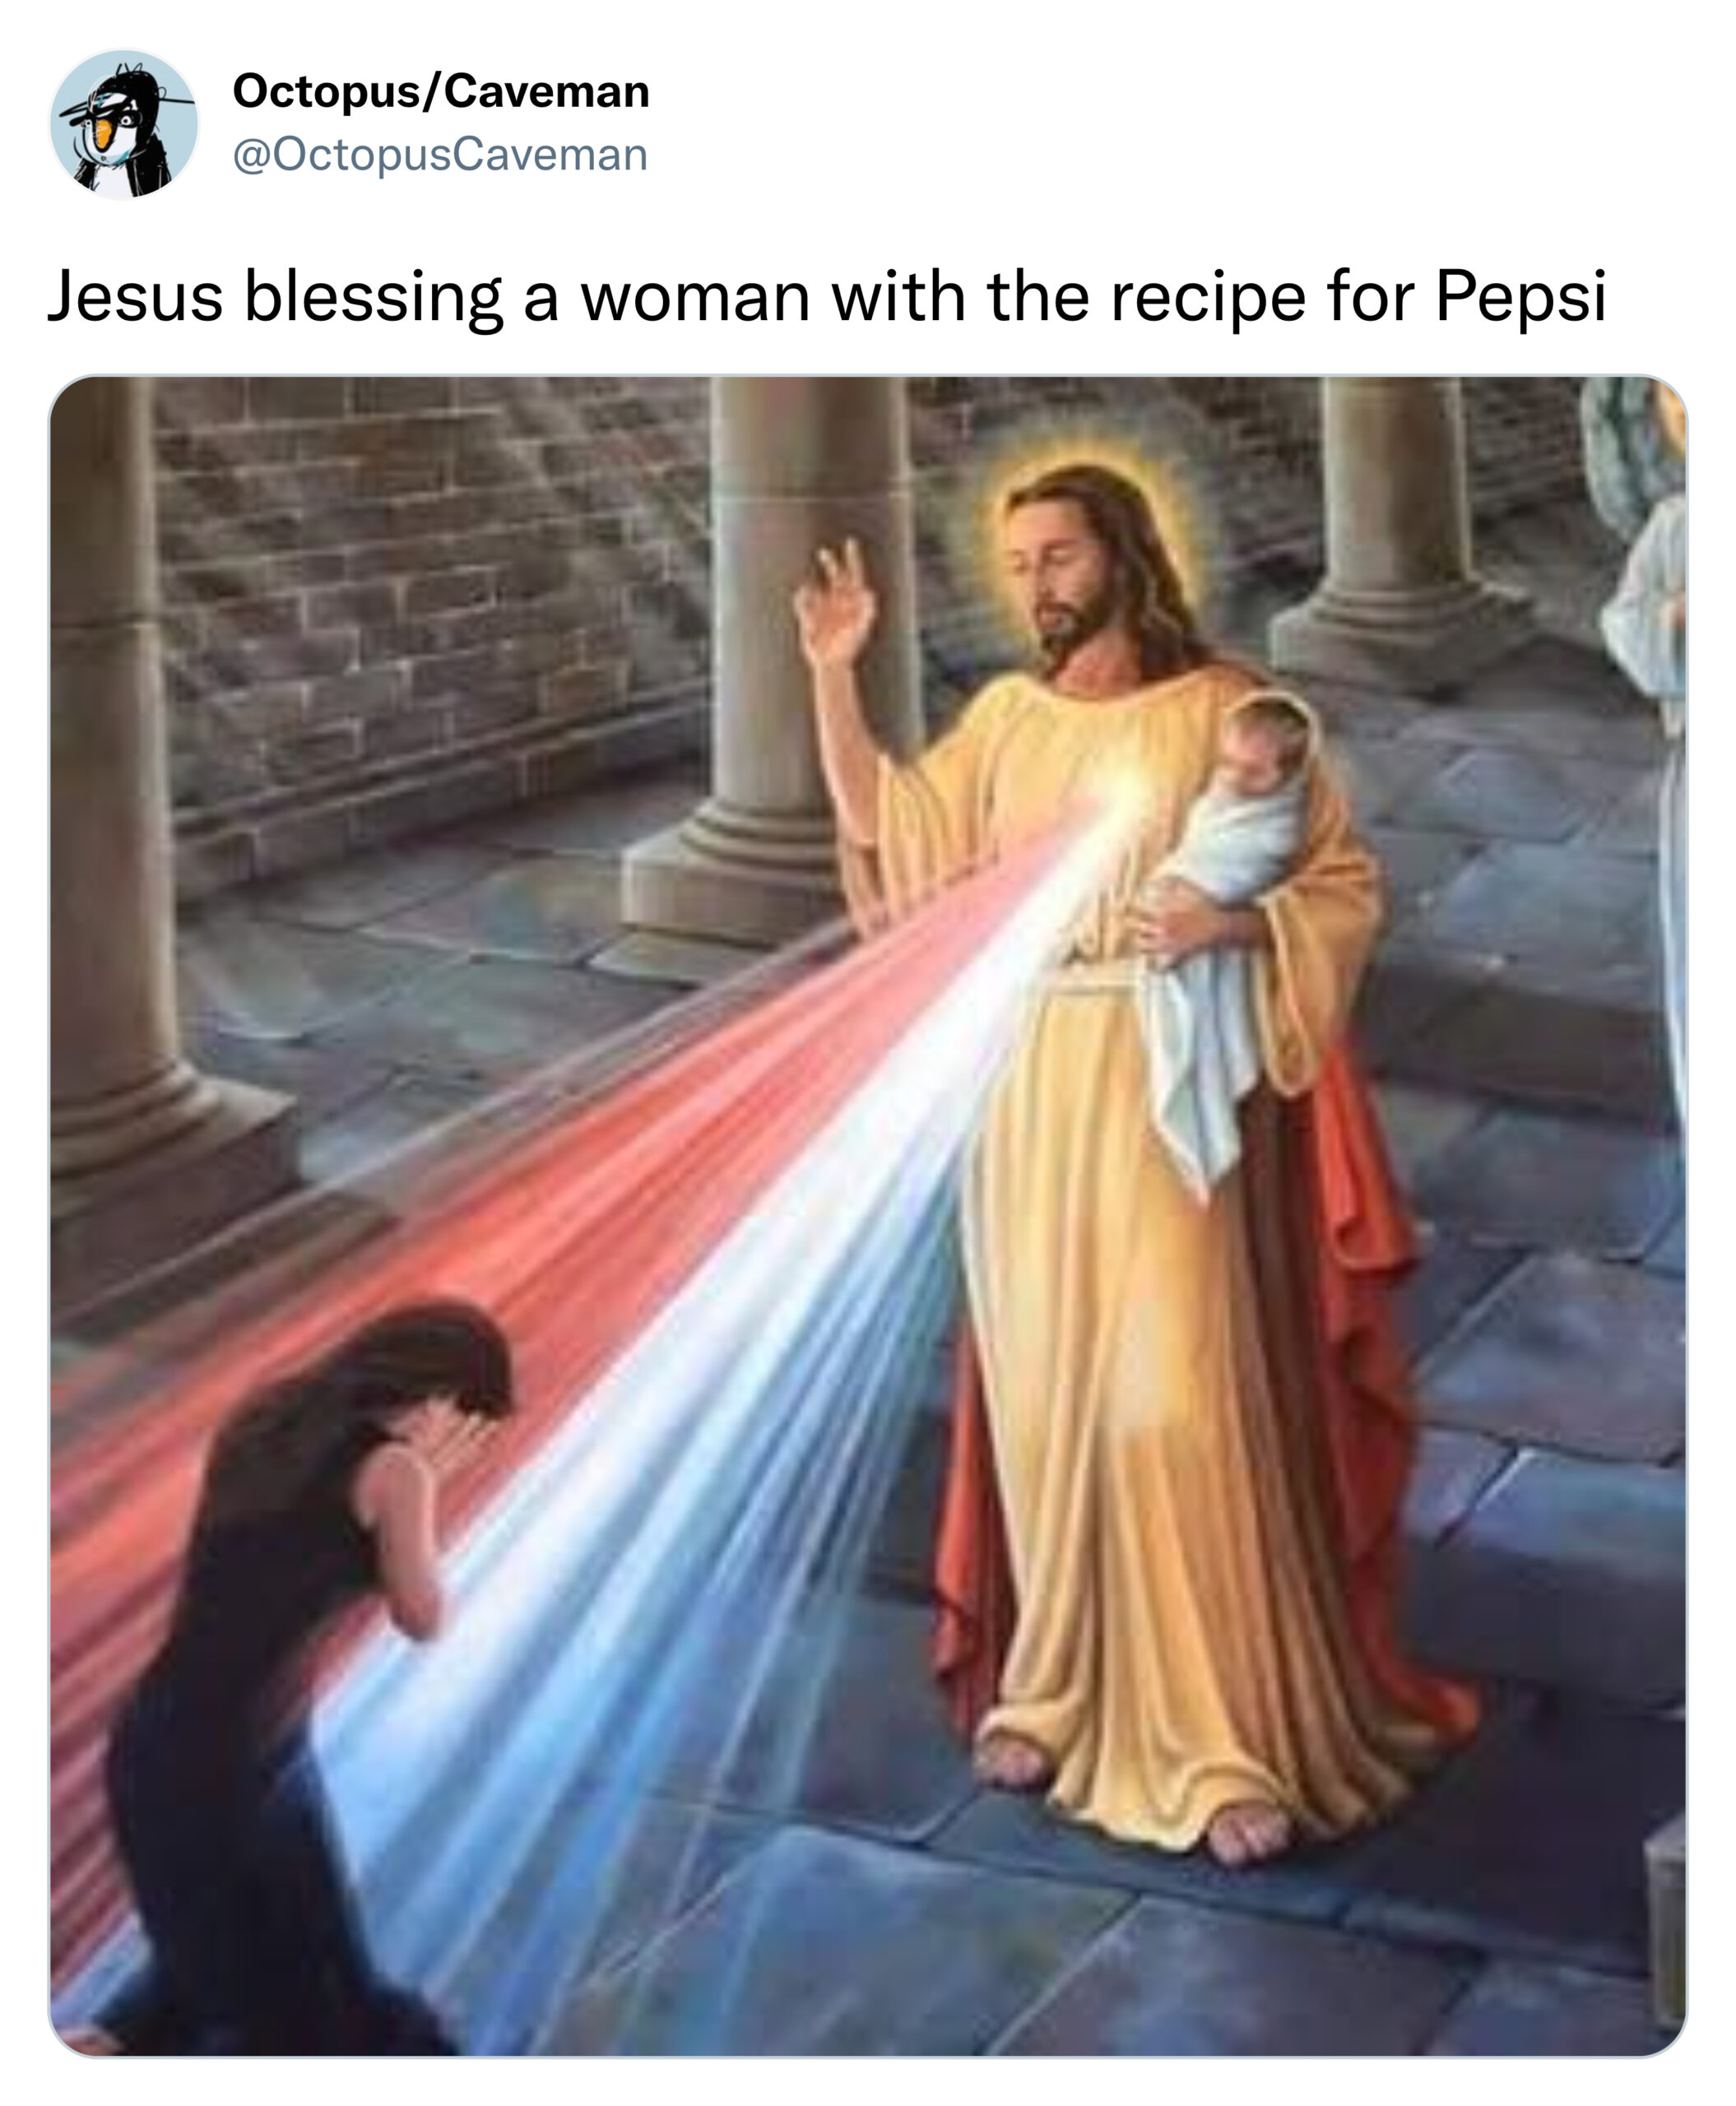 funny tweets and posts on twitter -  religion - OctopusCaveman Jesus blessing a woman with the recipe for Pepsi